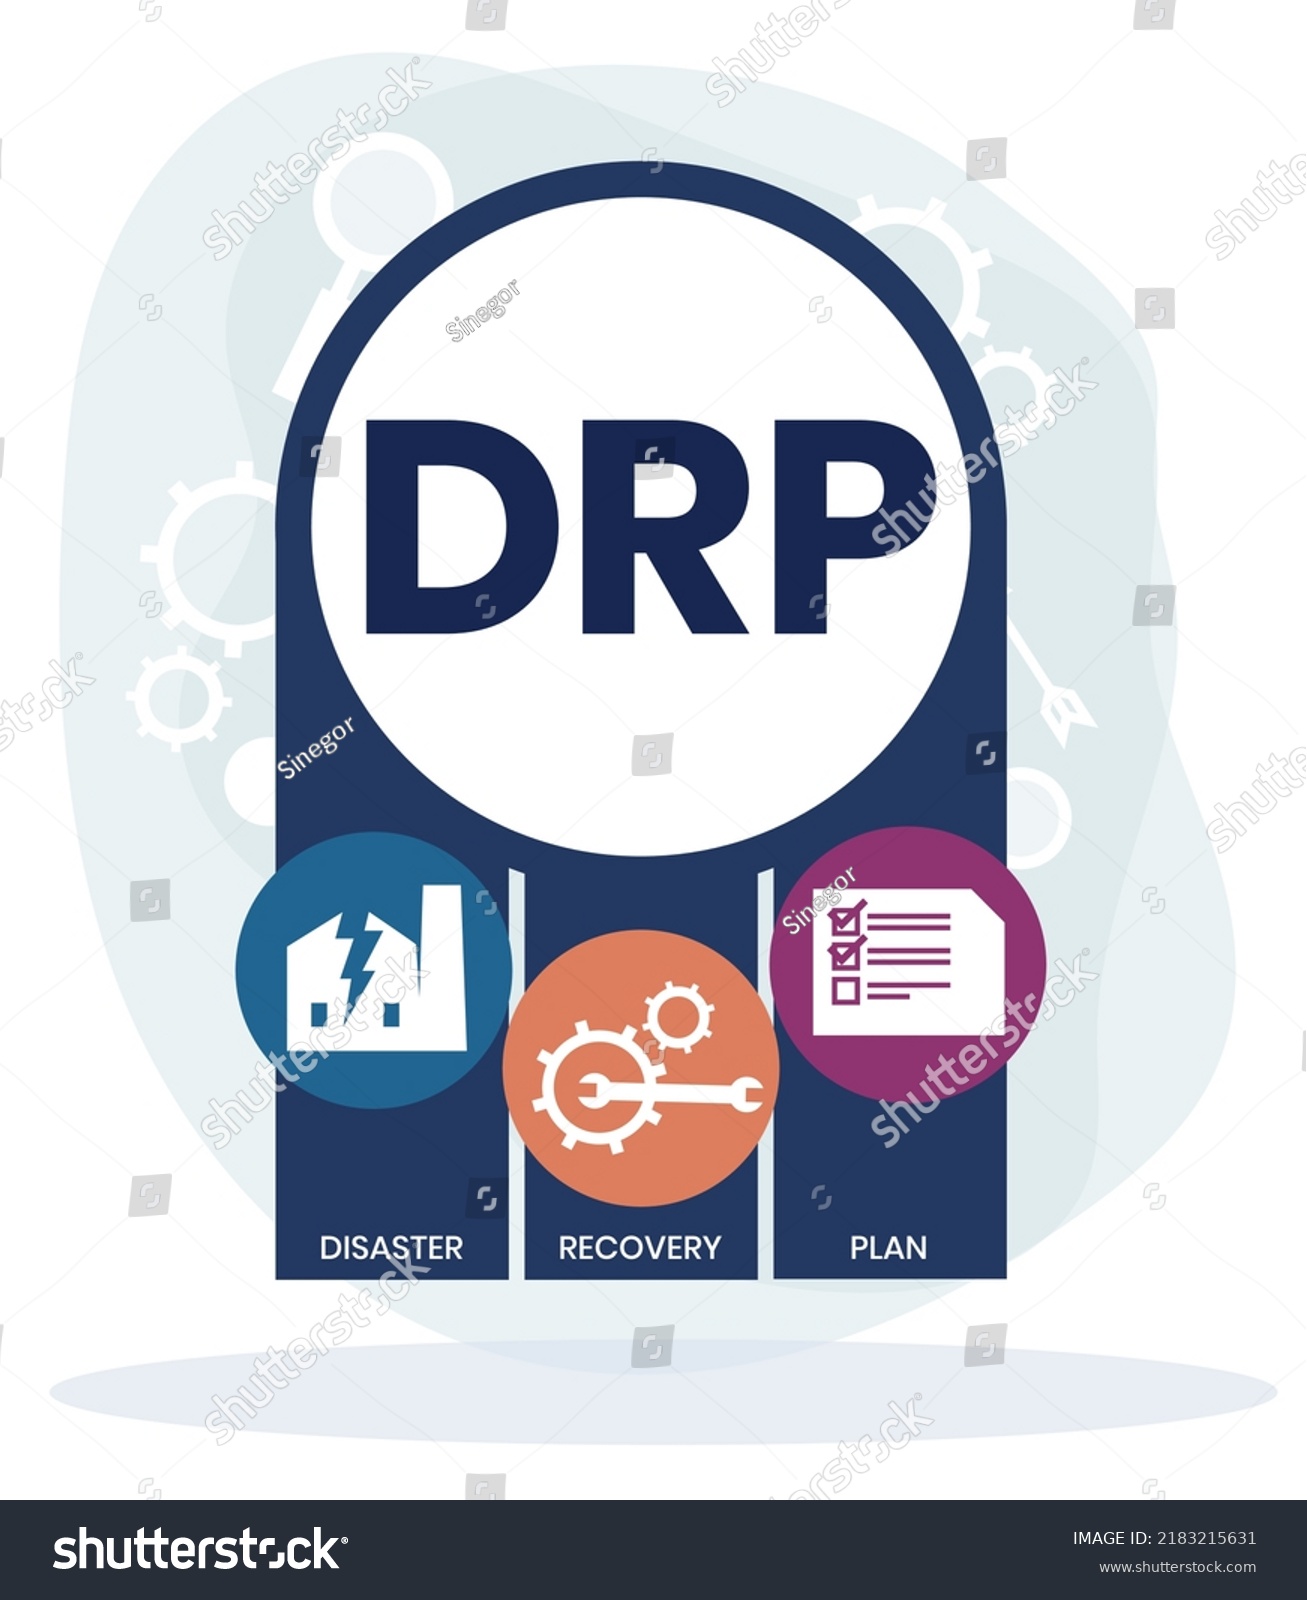 drp-disaster-recovery-plan-business-concept-stock-vector-royalty-free